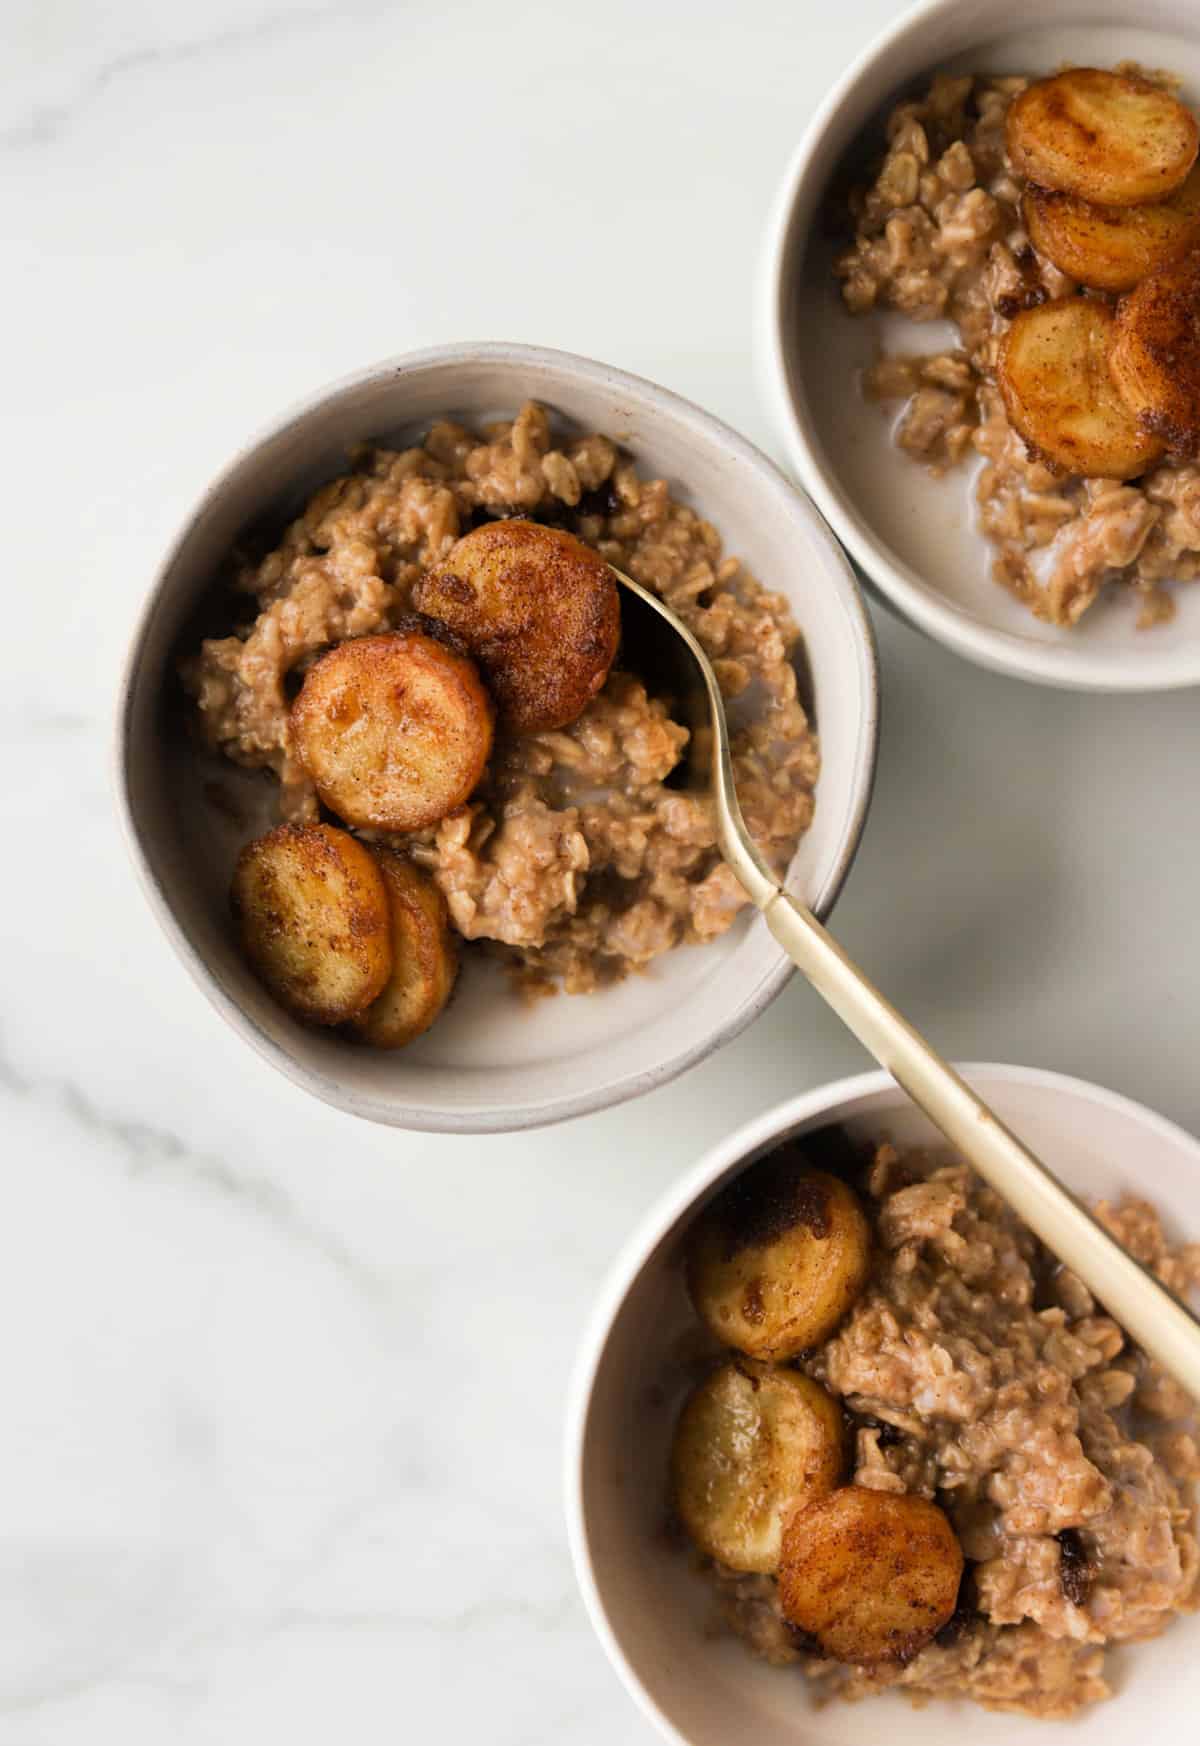 An overhead shot of bowls of peanut butter oatmeal with caramelized bananas on top.